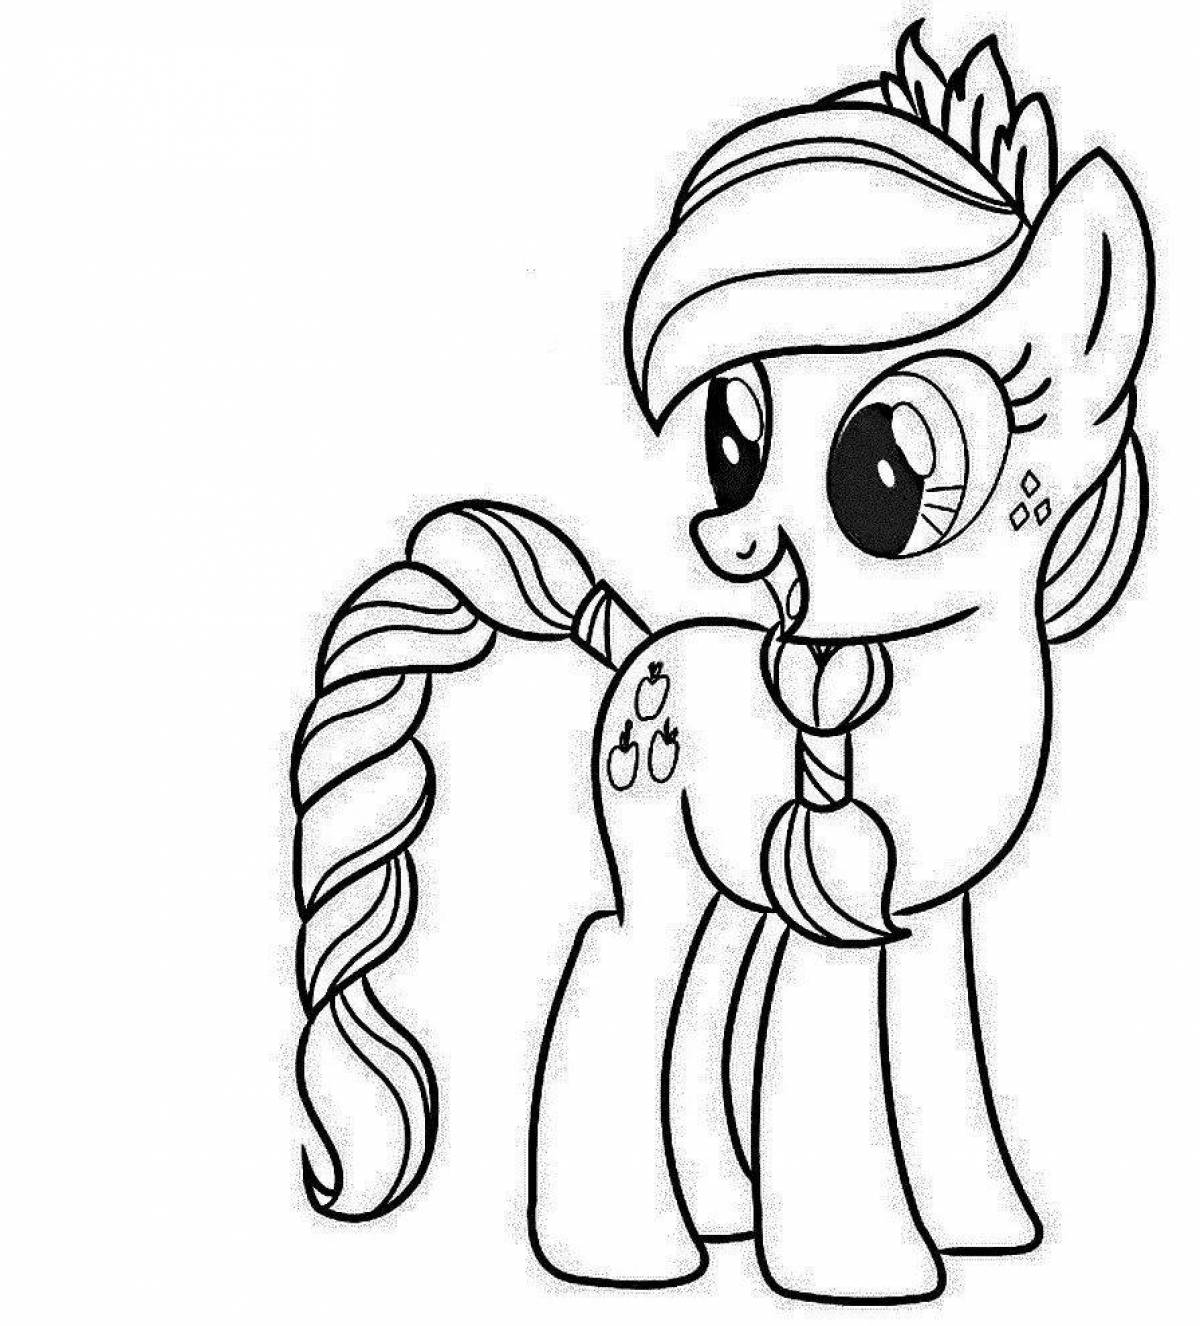 Awesome pony coloring pages for 4-5 year olds